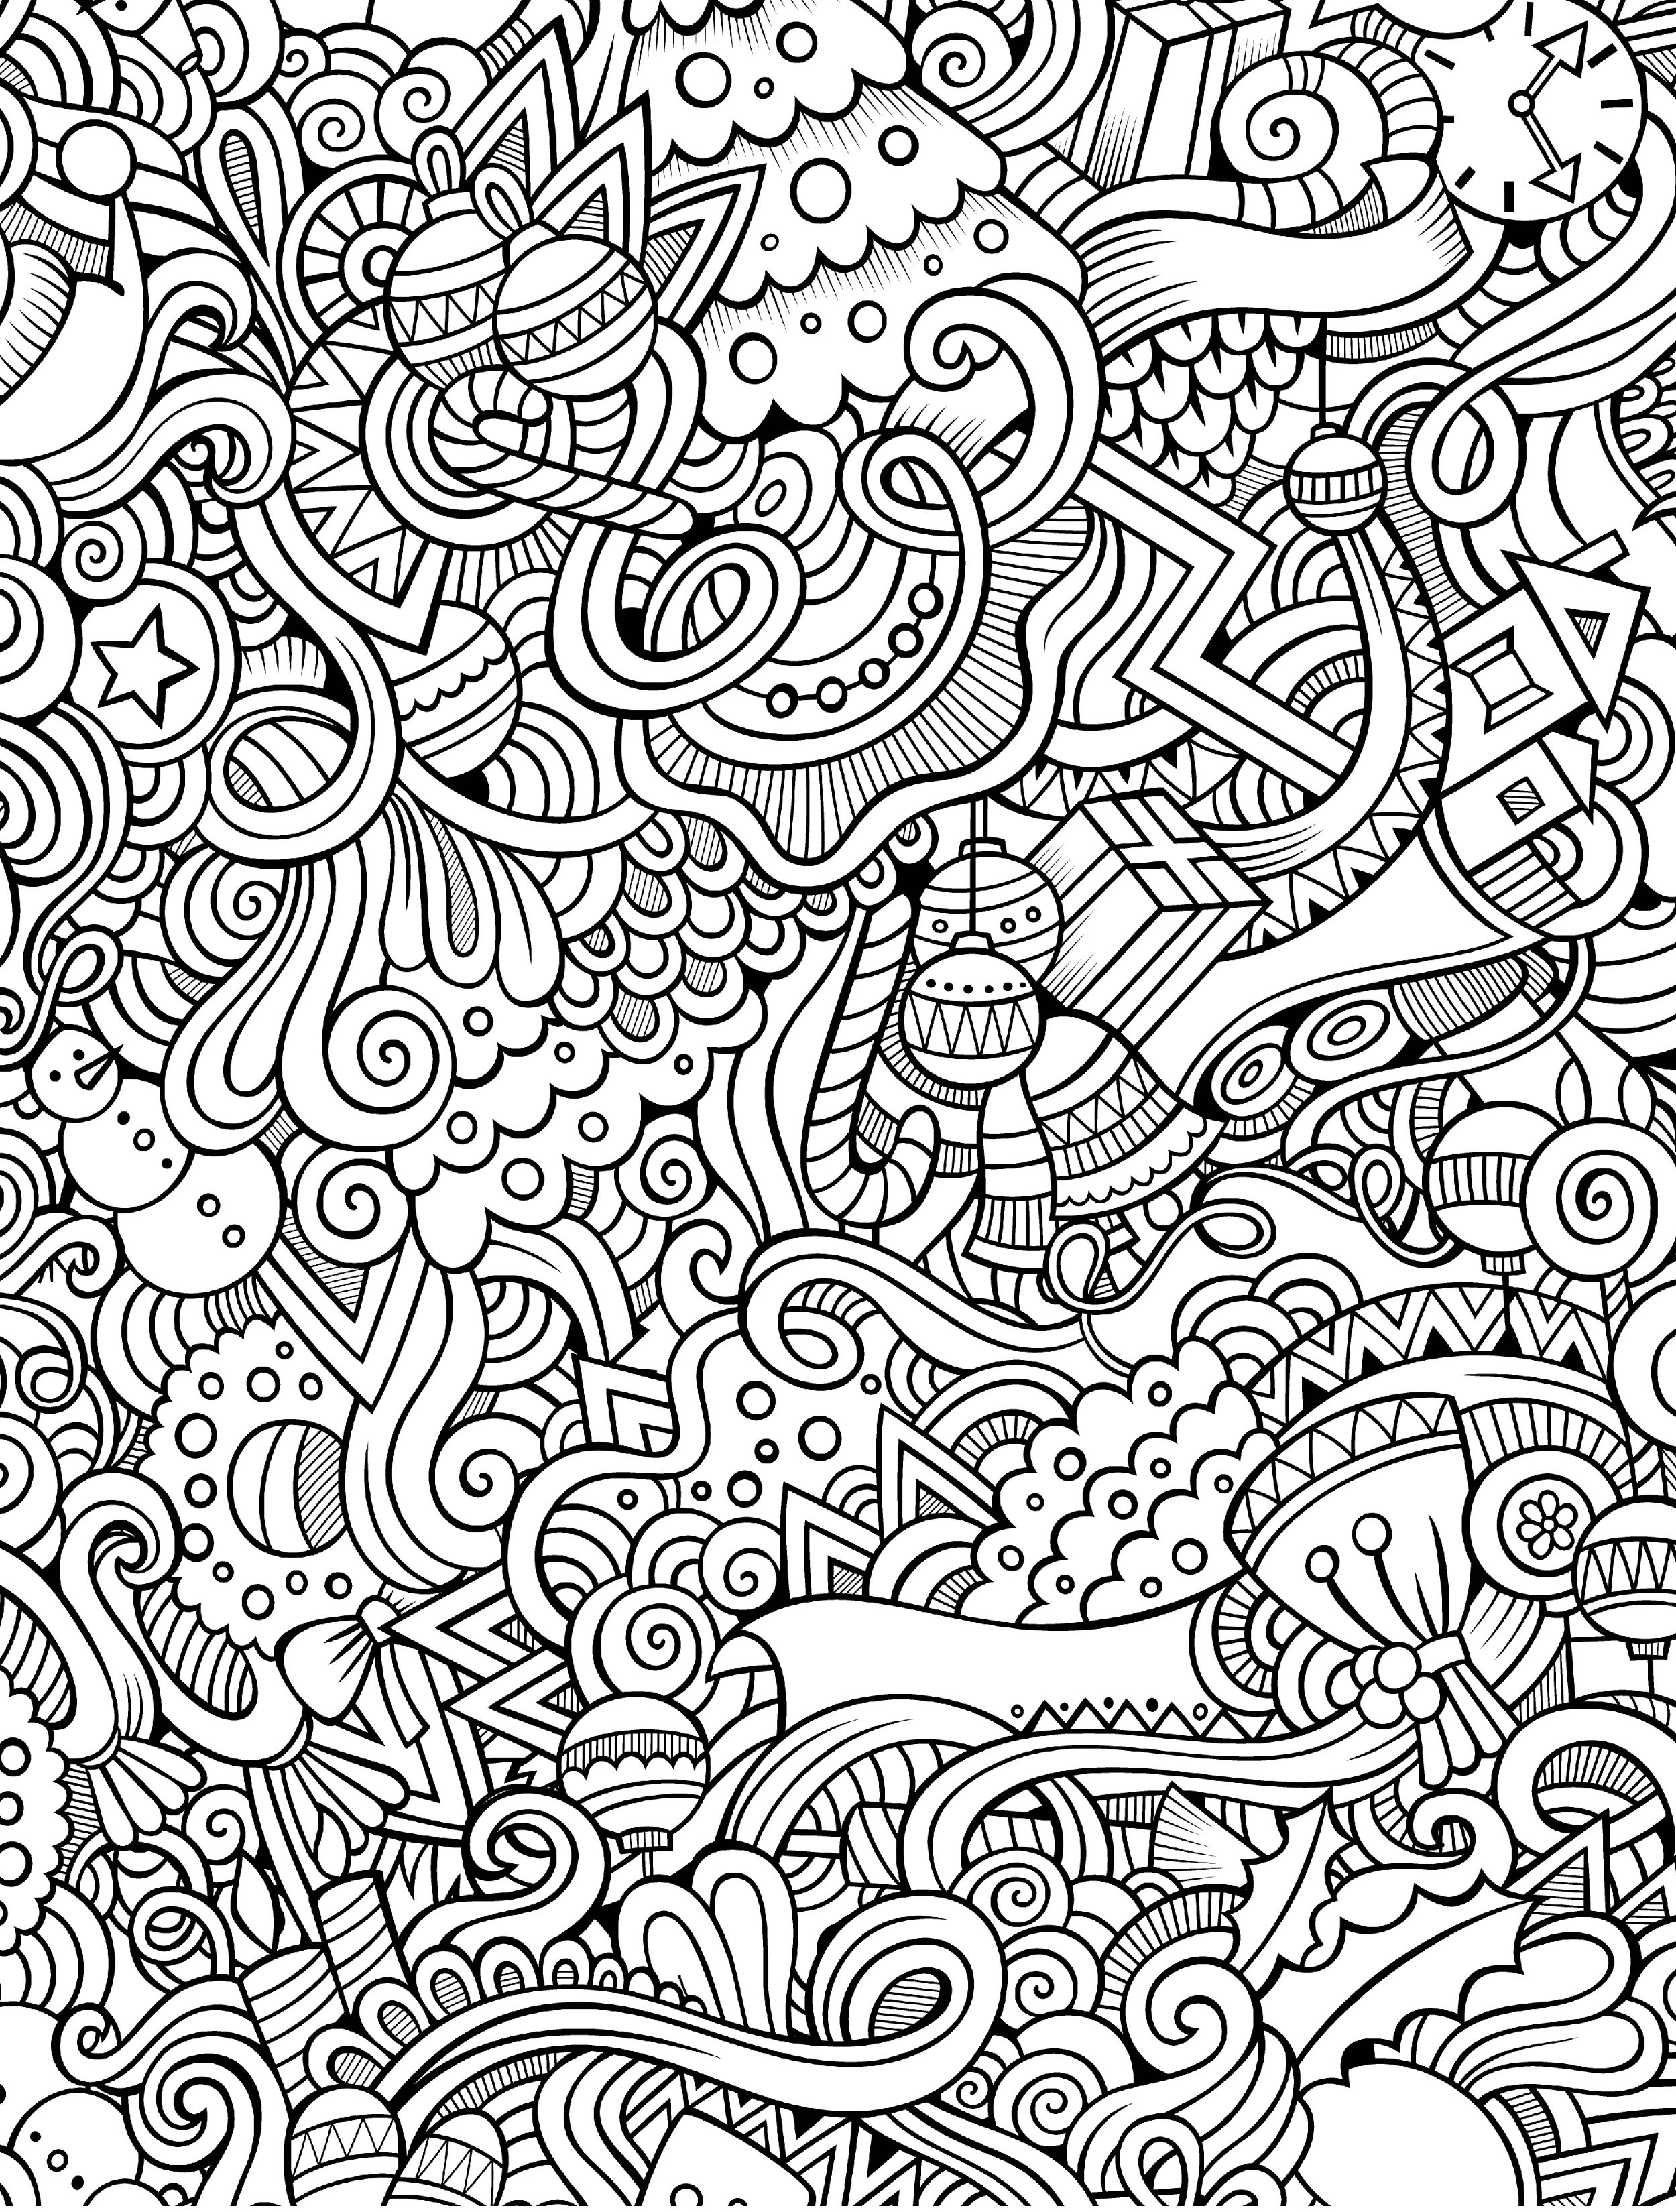 Free Printable Coloring Pages For Adults
 10 Free Printable Holiday Adult Coloring Pages